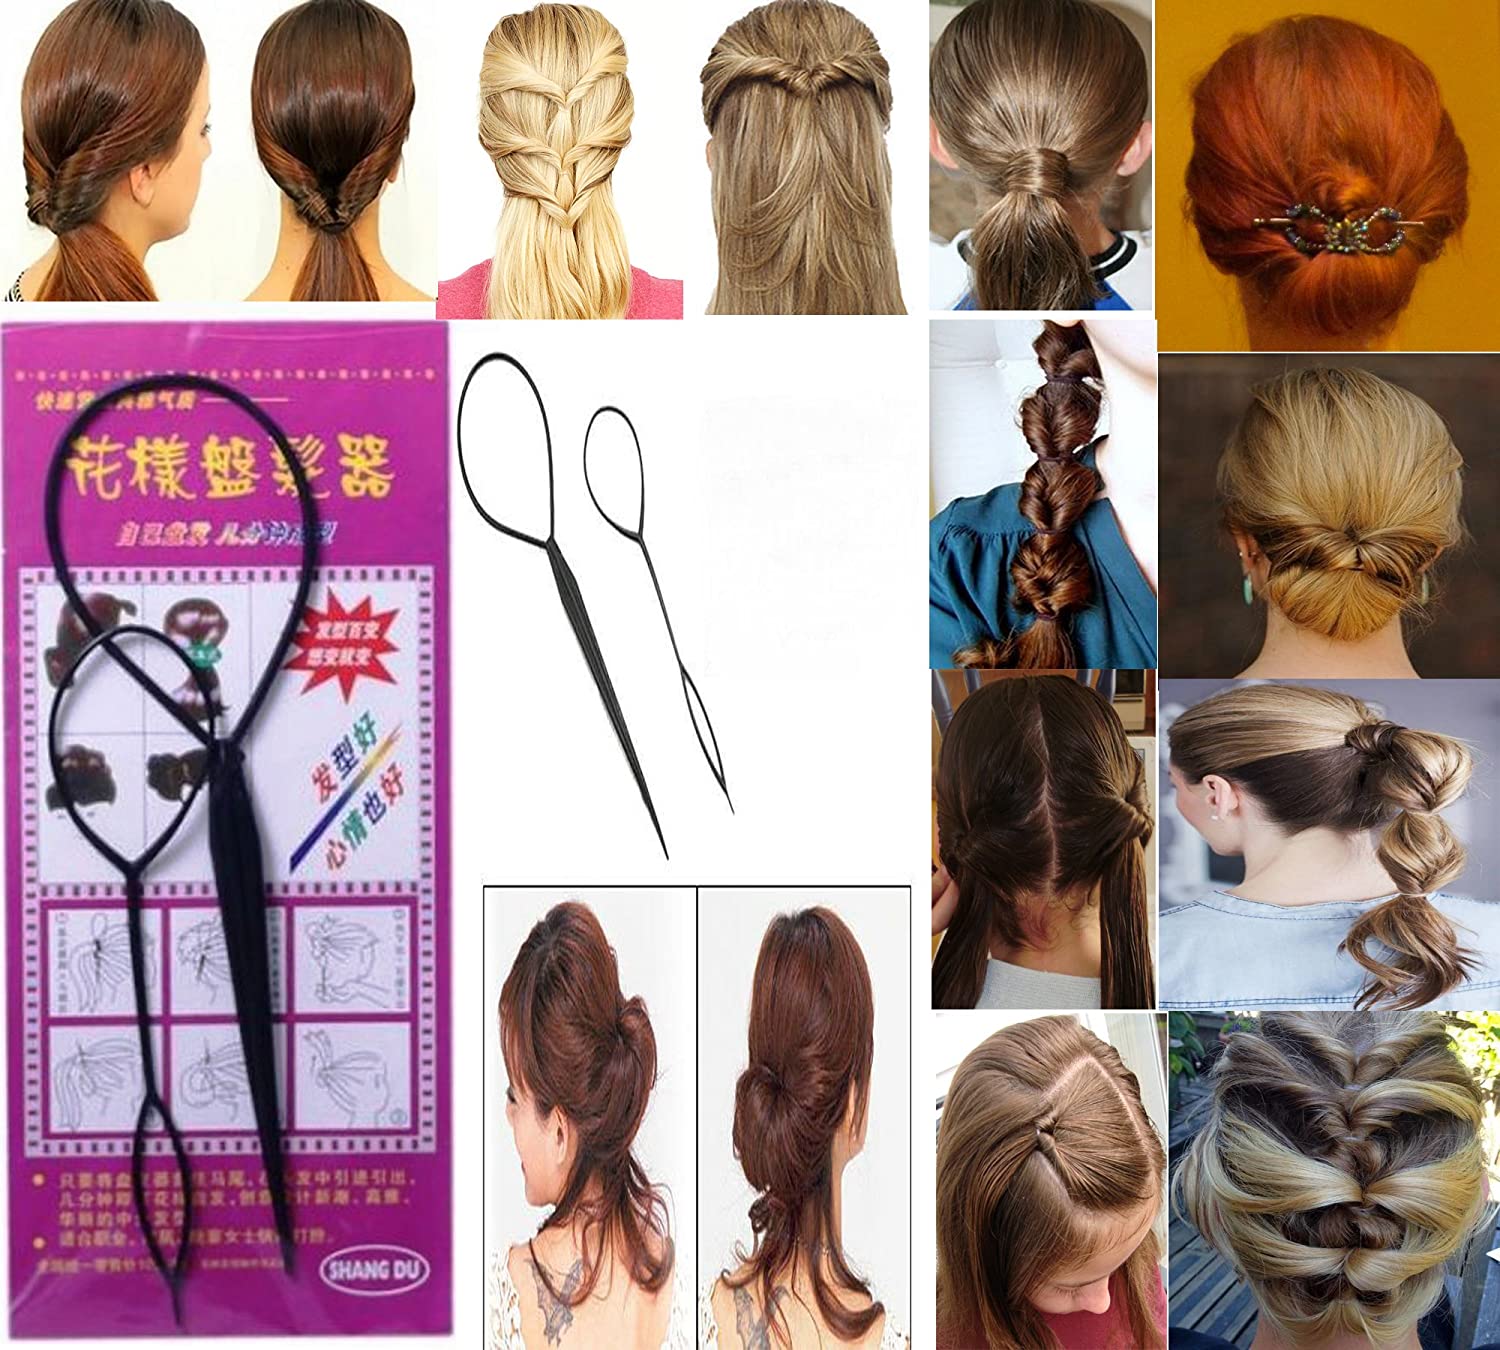 Pack Of High Quality Braids Tool Hair Accessories For Latest Hair Styles  Curler, Twister, Pony Tail Maker, Weave Braid, Bun Roller Clip Fashions For  Women, Girls: Buy Online At Best Prices |